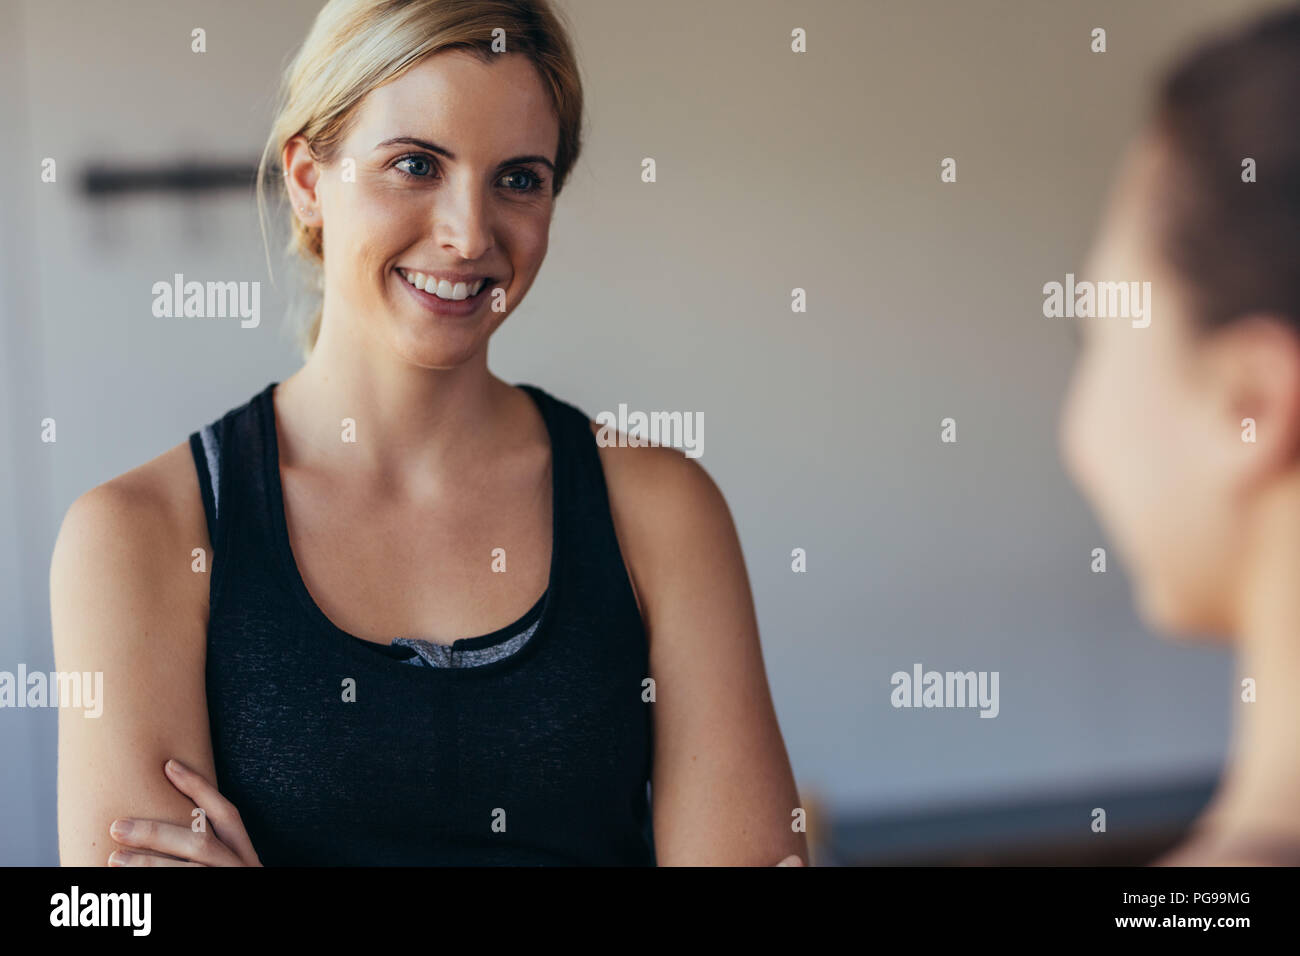 Smiling woman in fitness wear at a pilates training gym. Woman talking to a friend at the gym. Stock Photo